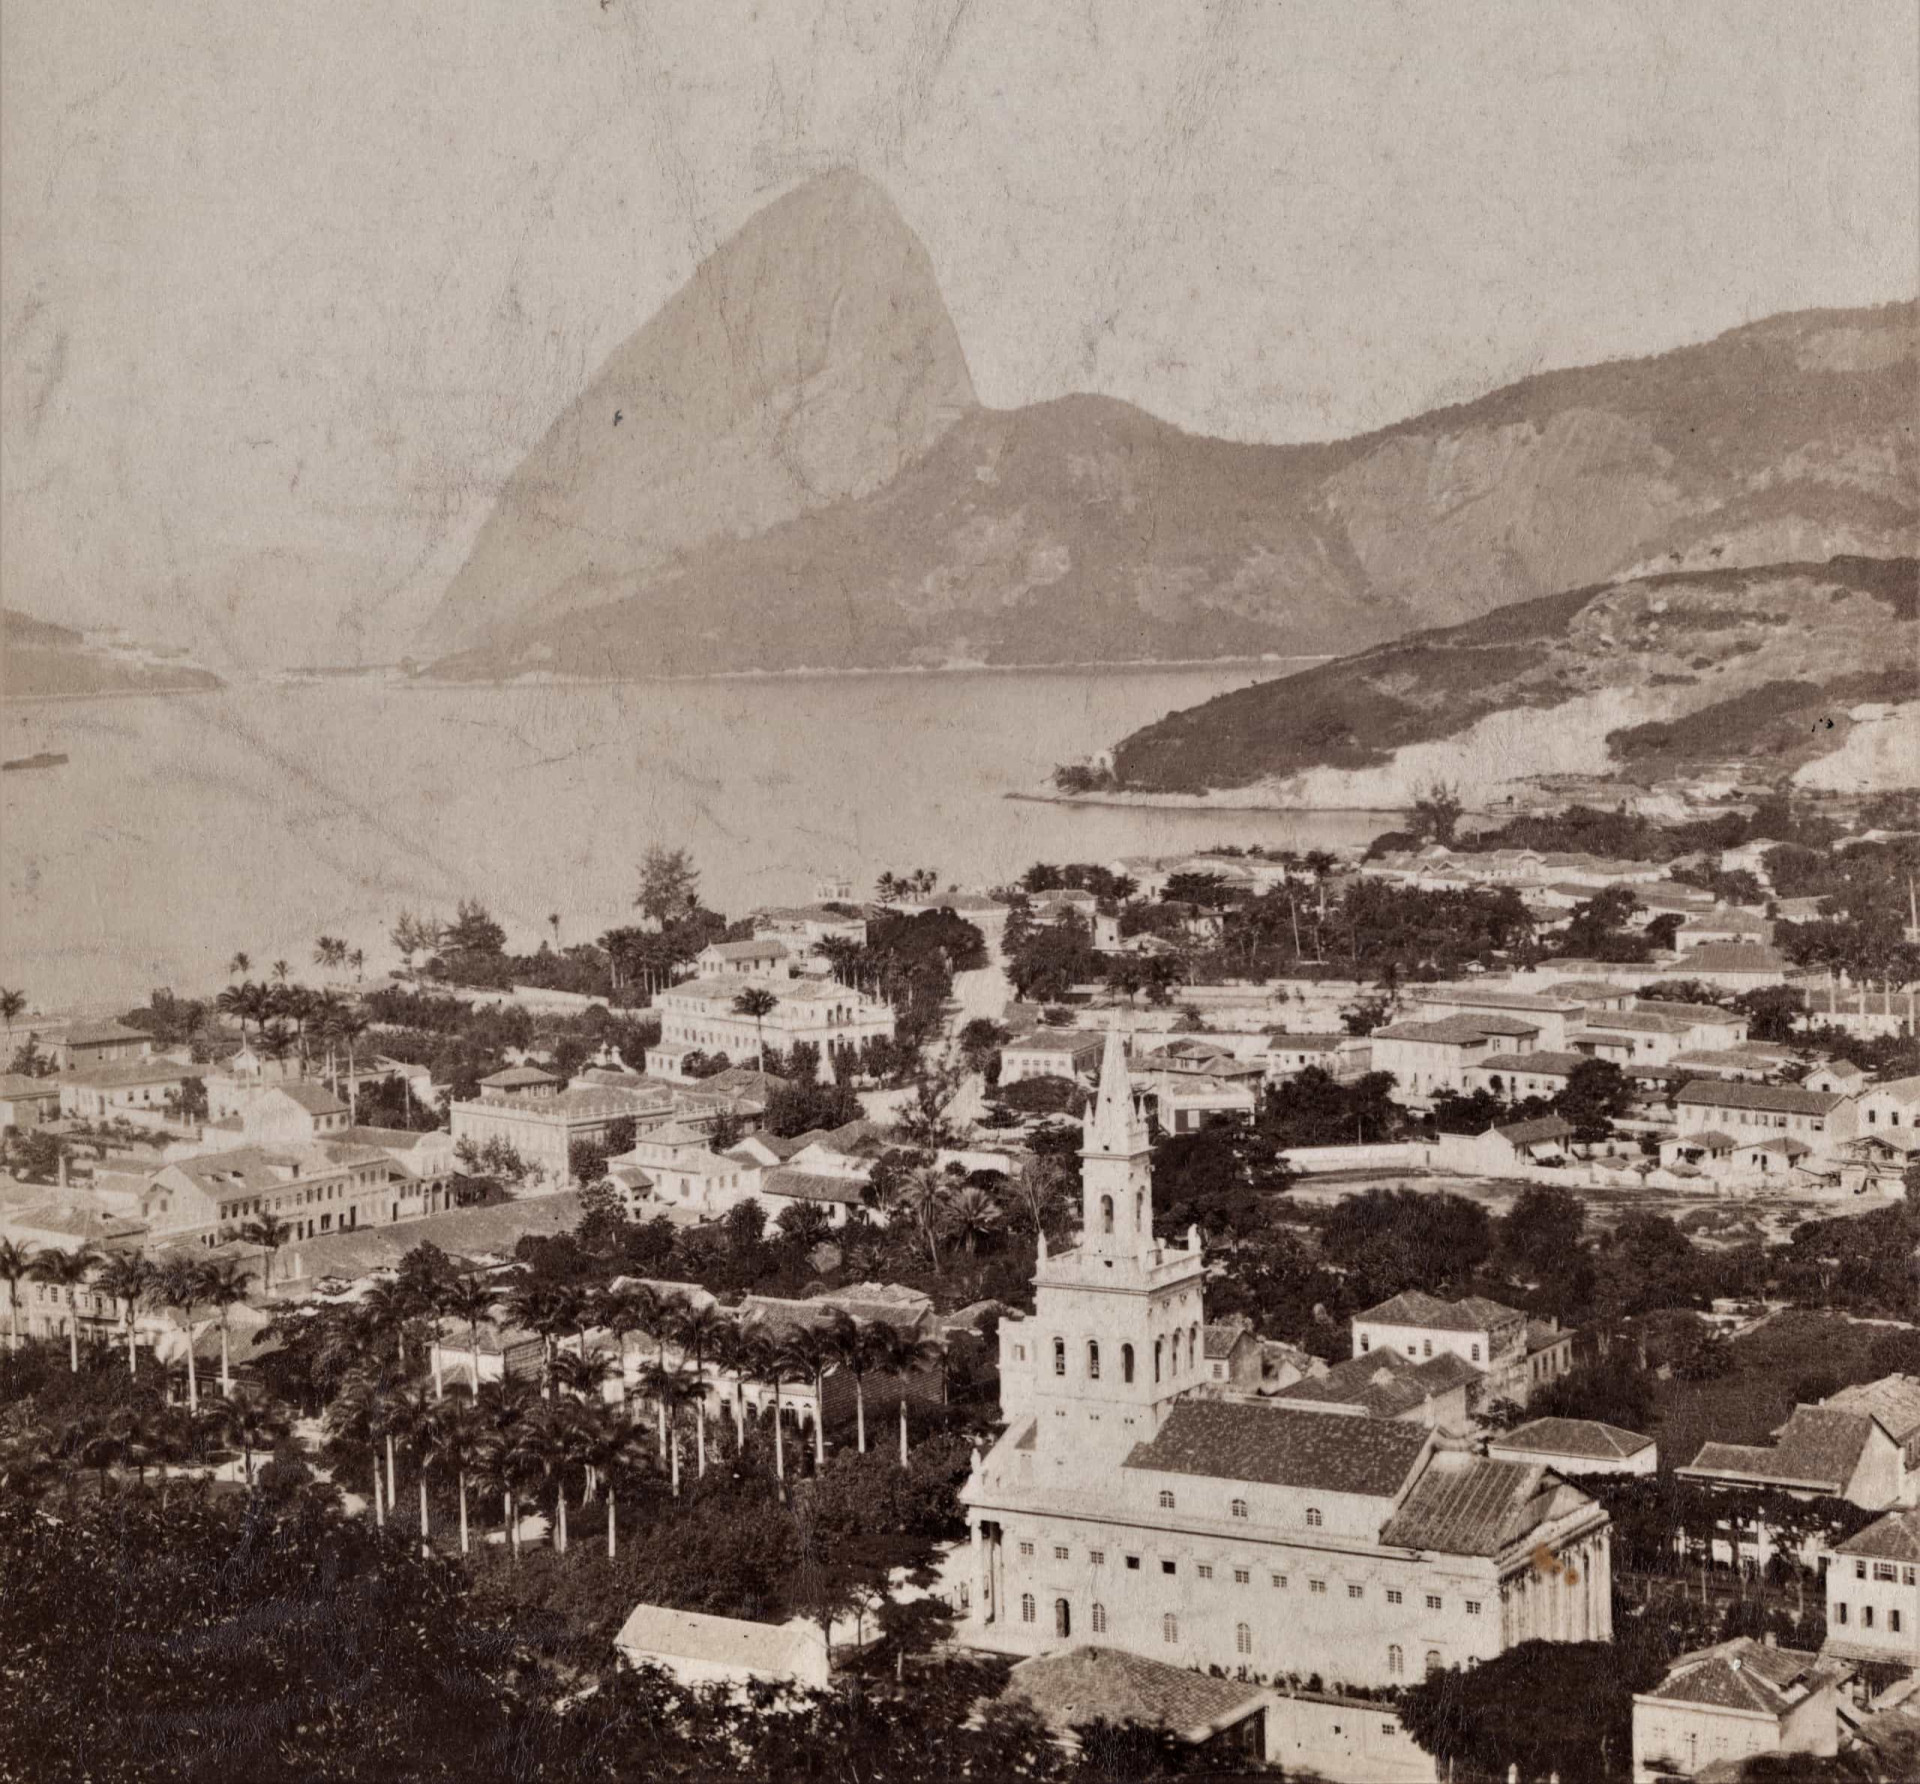 A snap of Rio circa 1860. The famous Christ the Redeemer would arrive later in 1931.<p>You may also like:<a href="https://www.starsinsider.com/n/348294?utm_source=msn.com&utm_medium=display&utm_campaign=referral_description&utm_content=397441v1en-en"> Meet the stars with criminal parents</a></p>